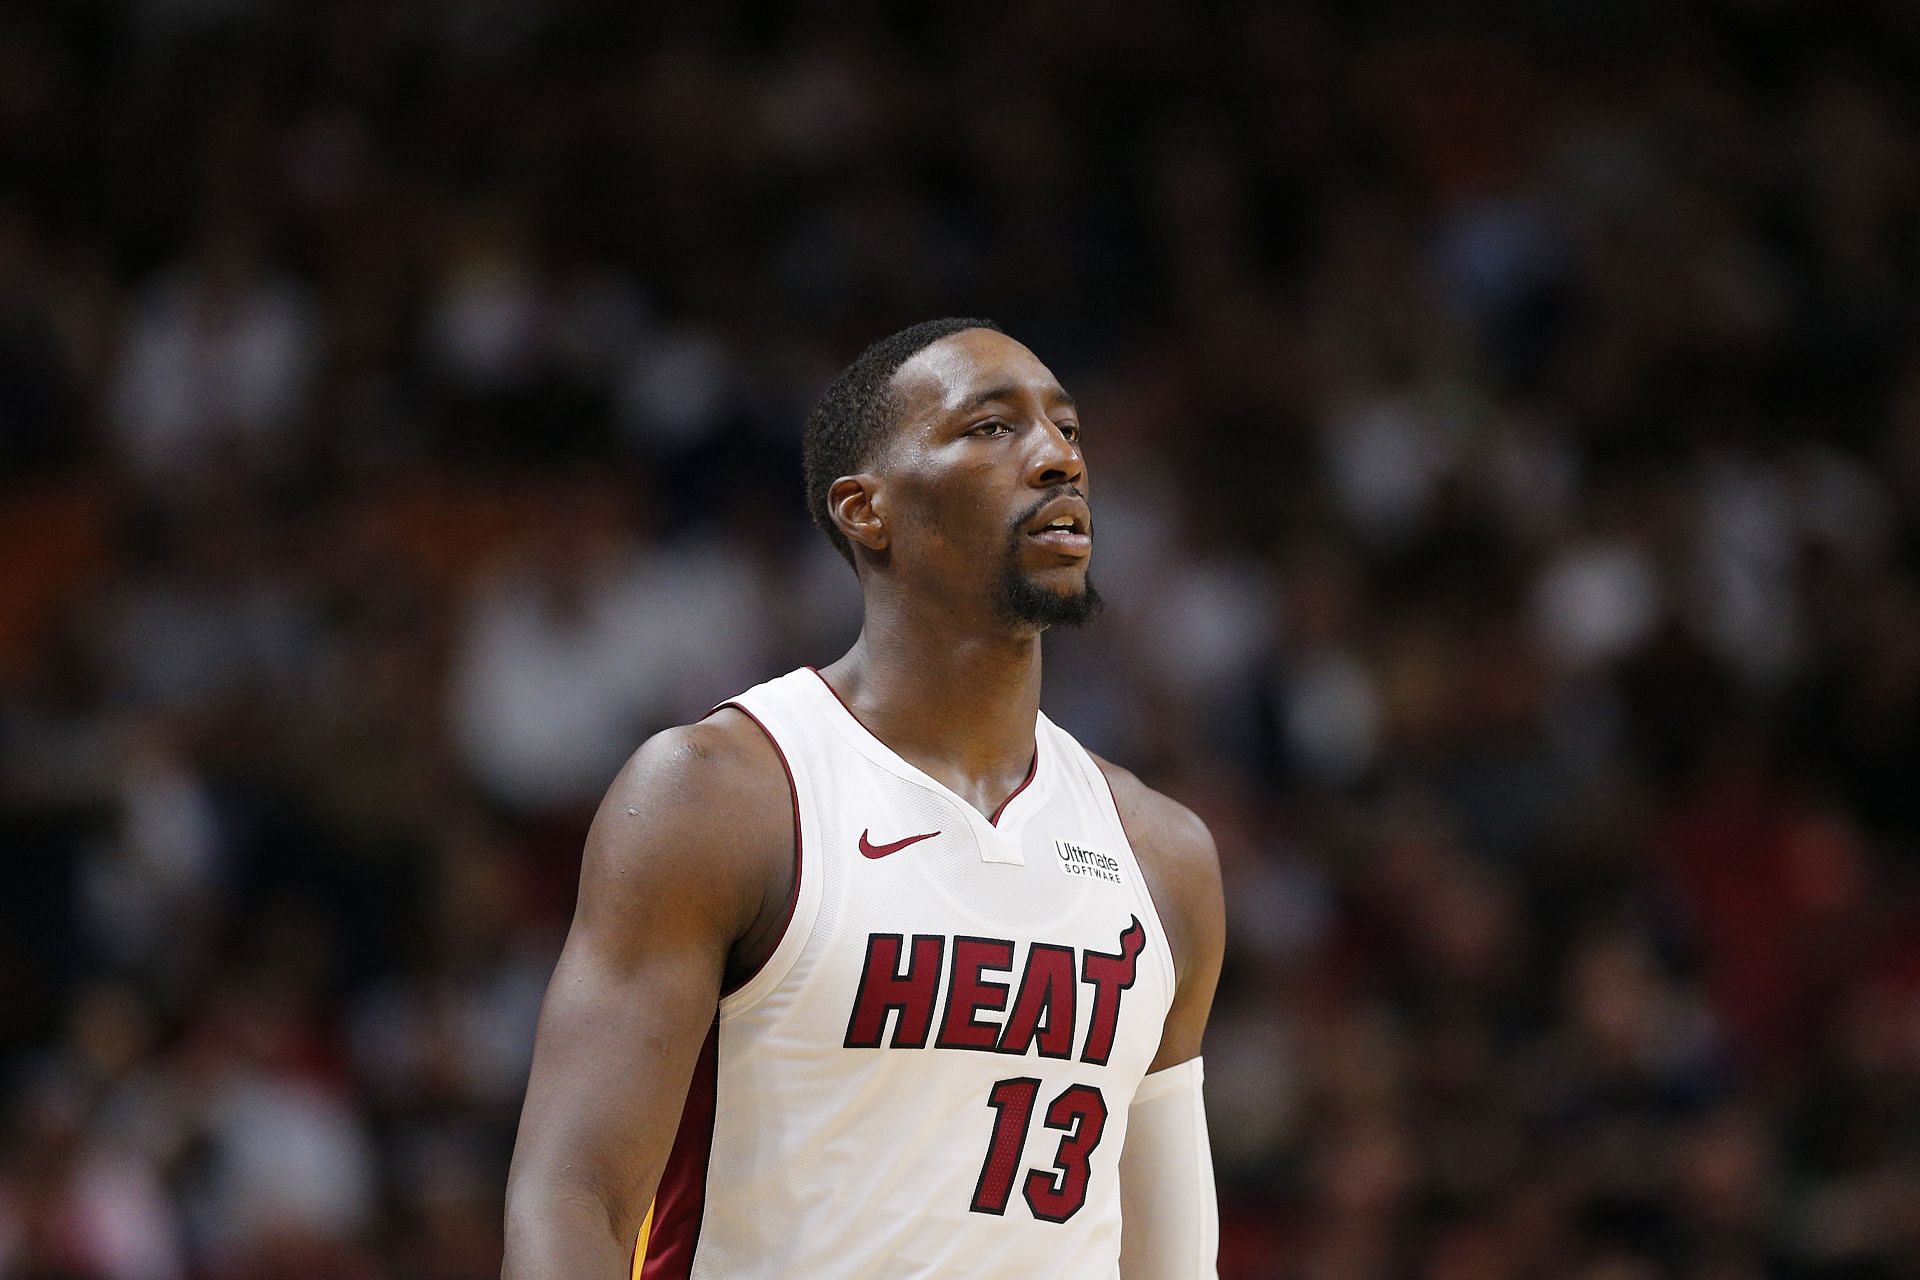 Miami Heat big man Bam Adebayo is expected to miss some time with an injury